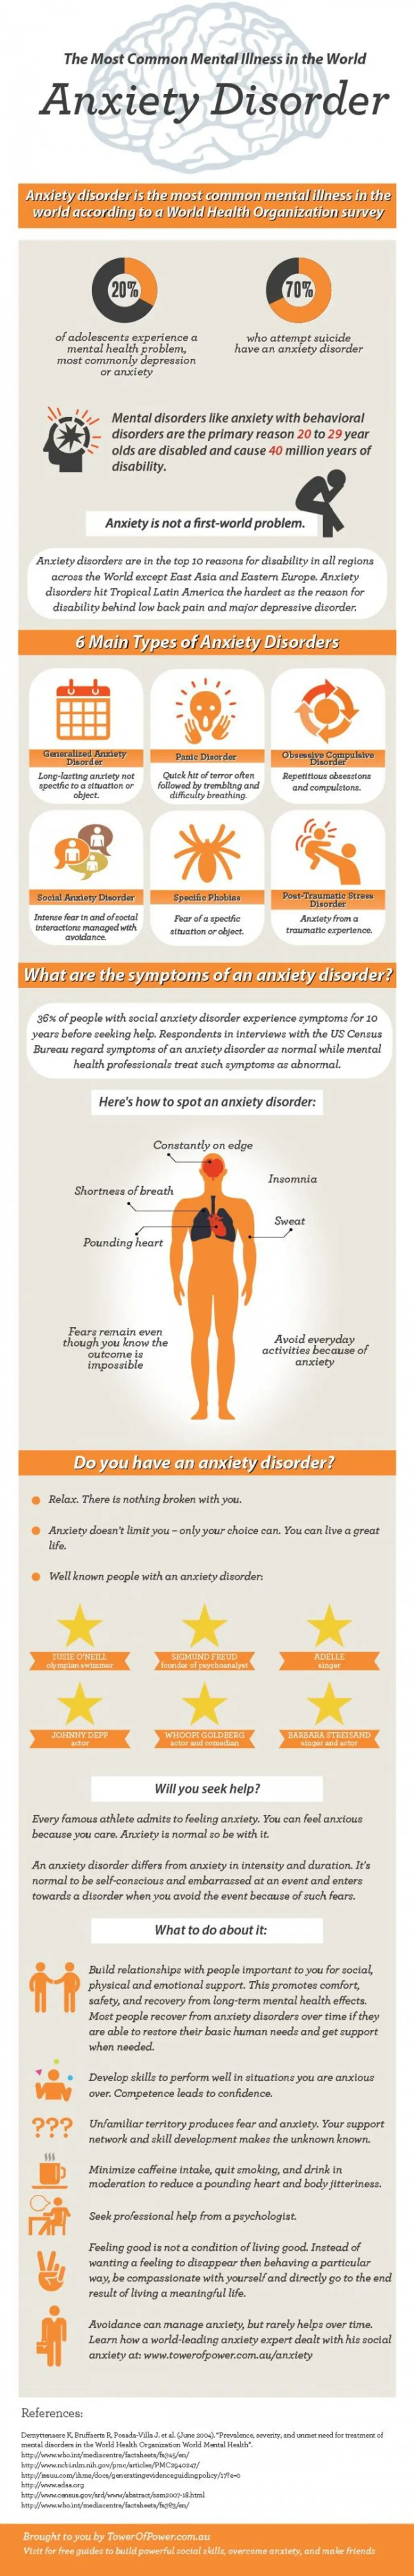 What You Should Know about Anxiety Disorders